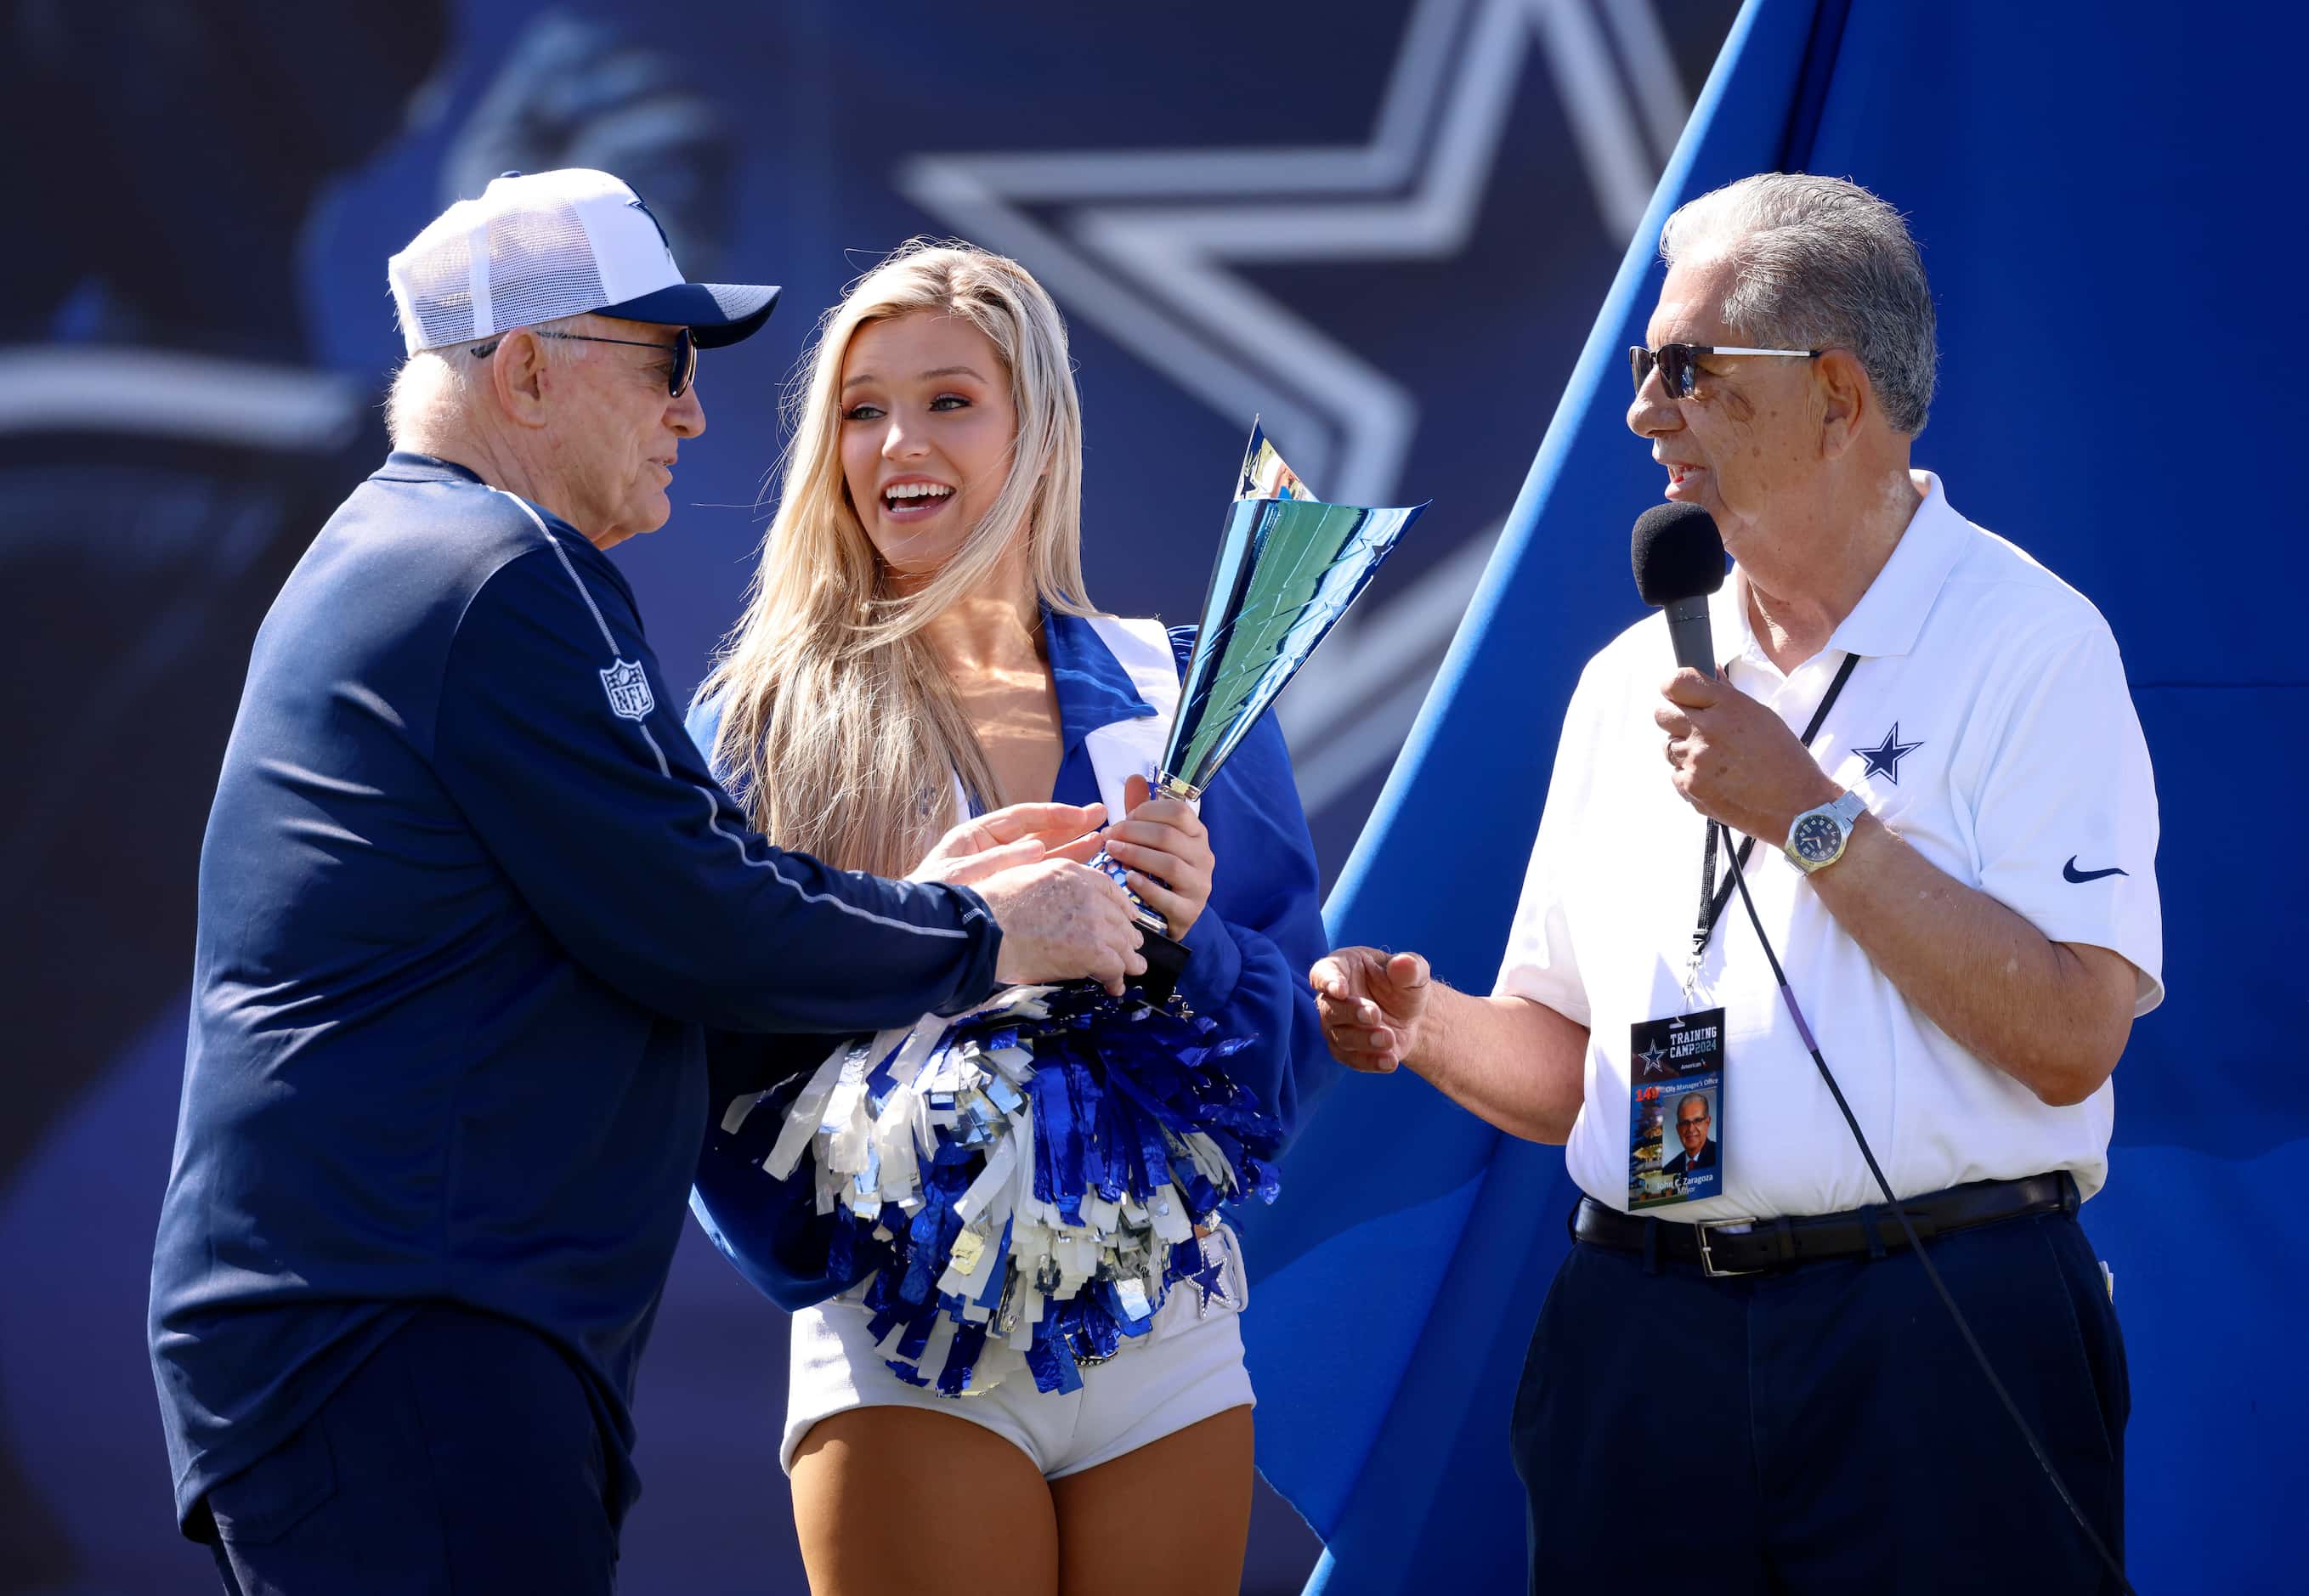 Dallas Cowboys owner Jerry Jones (left) hands a trophy gifted him by Oxnard Mayor John C....